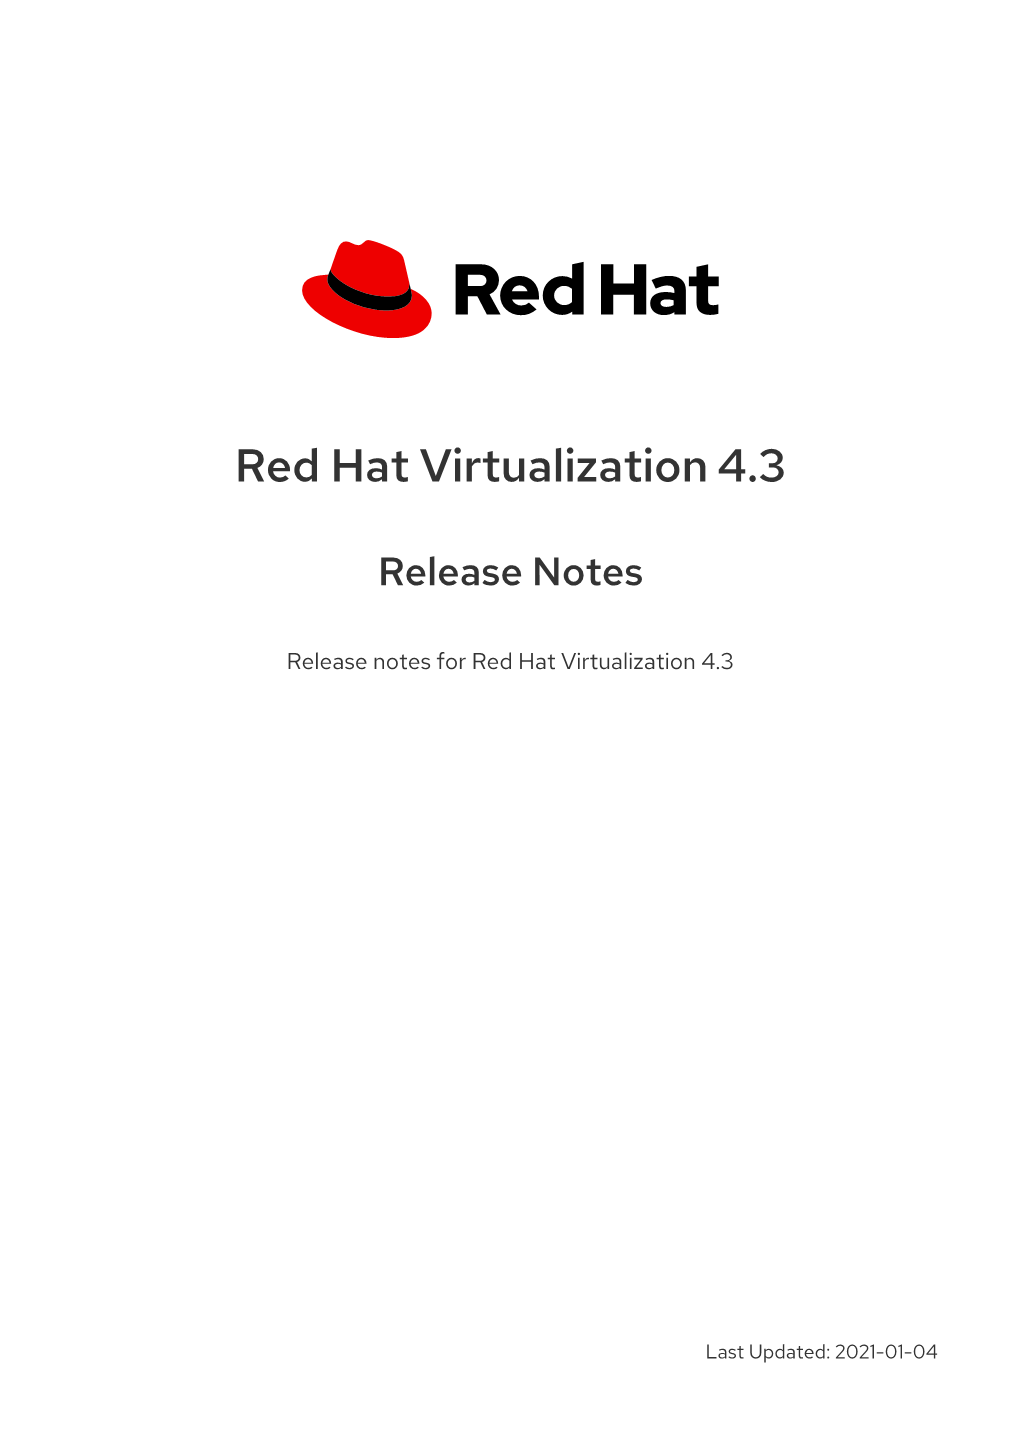 Red Hat Virtualization 4.3 Release Notes